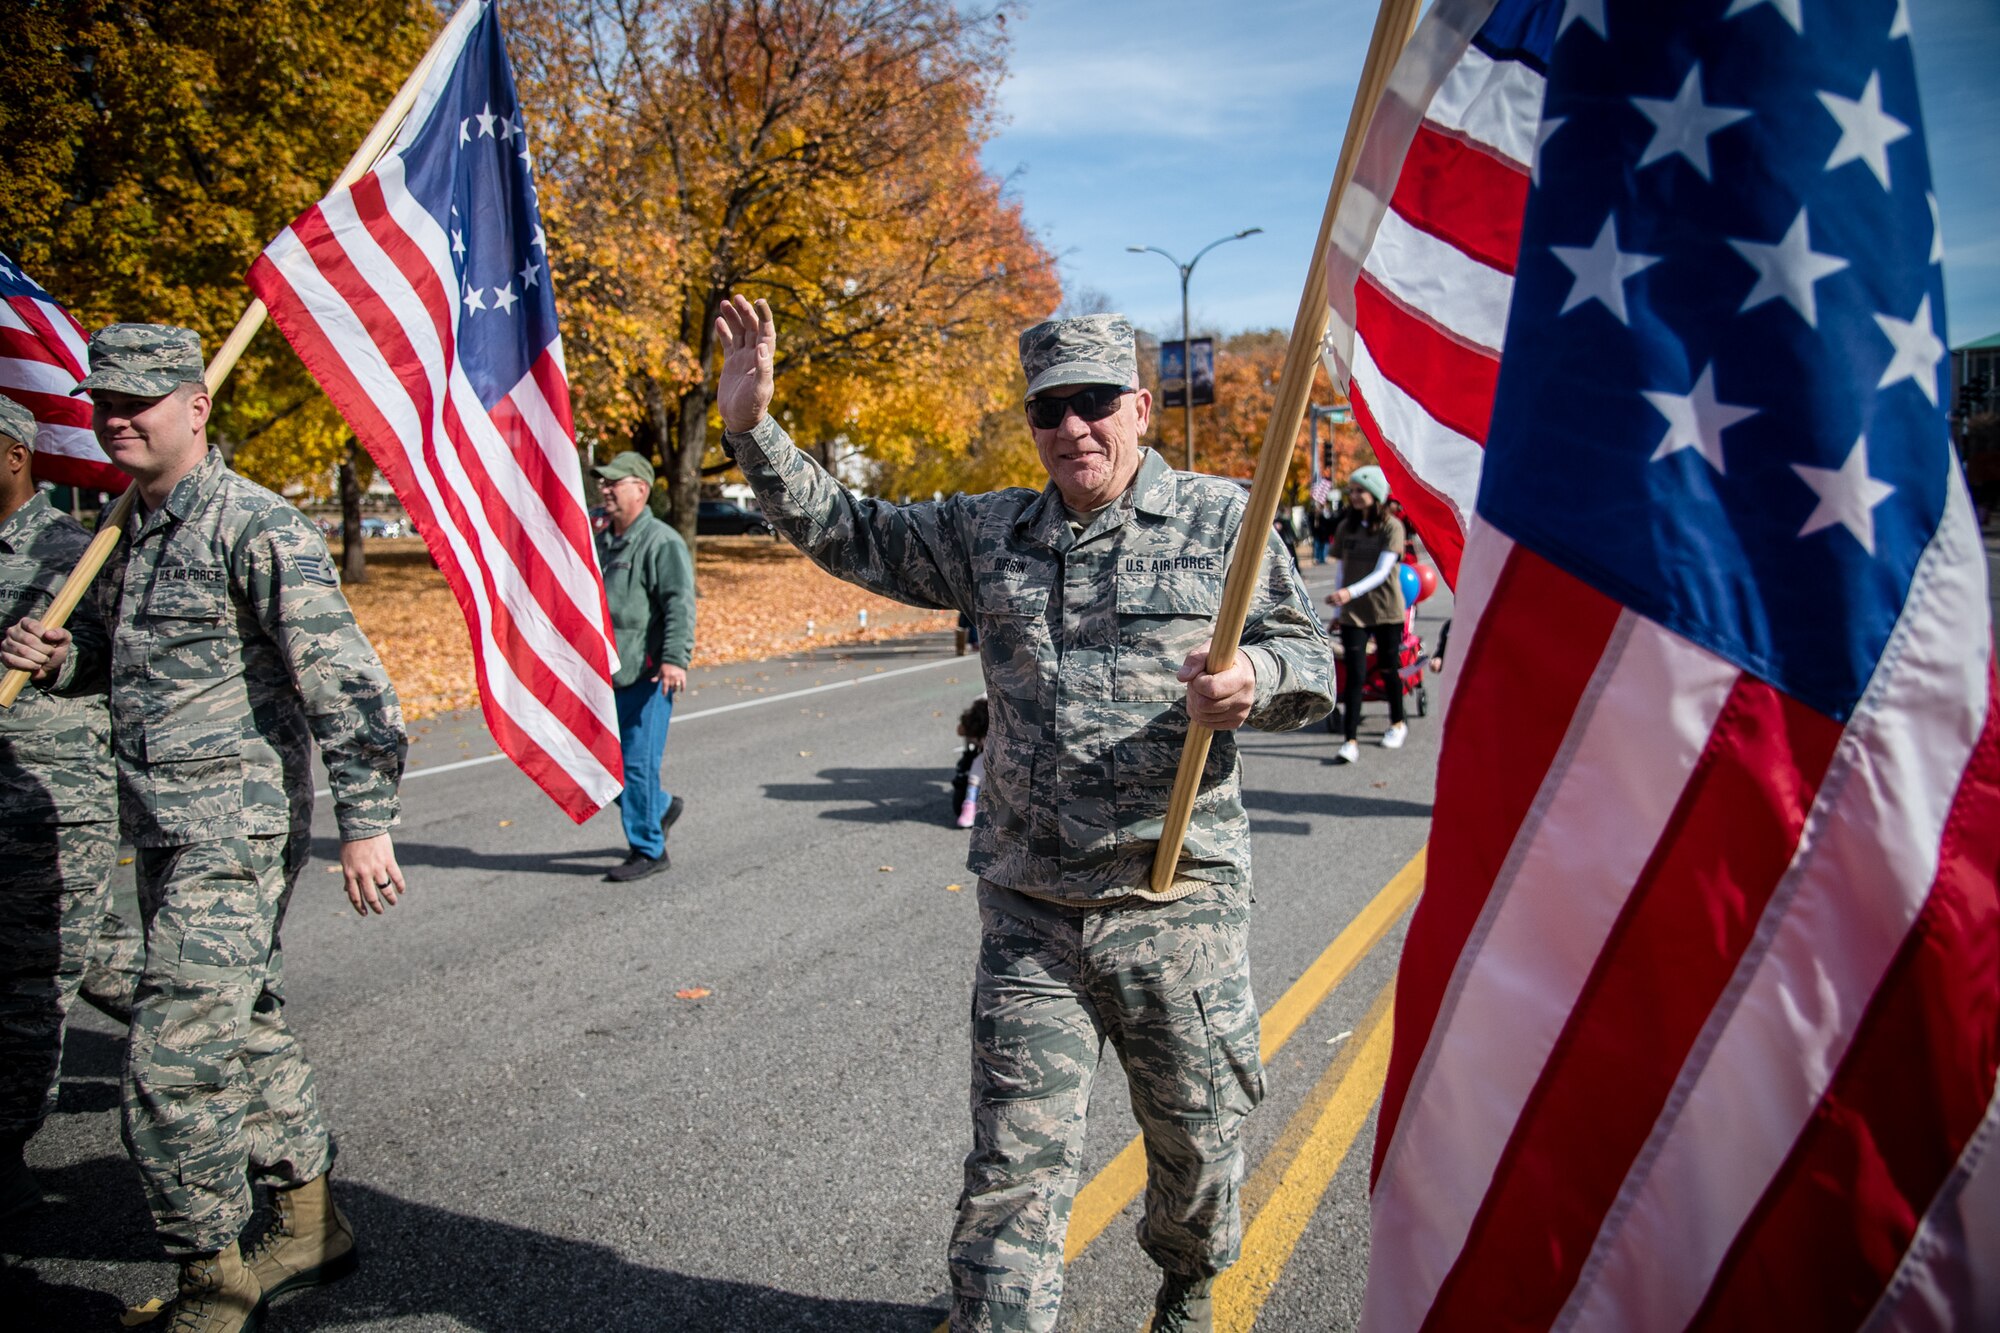 Master Sgt. Gregory Durbin, U.S Air Force Reserve Command Citizen Airmen from the 932nd Airlift Wing joined with family and friends to honor all Veterans at the St. Louis Veterans Day Parade, downtown St. Louis, Missouri, Nov. 9, 2019. Durbin has attended many parades in support of the 932nd AW. (U.S. Air Force photo by Christopher Parr)